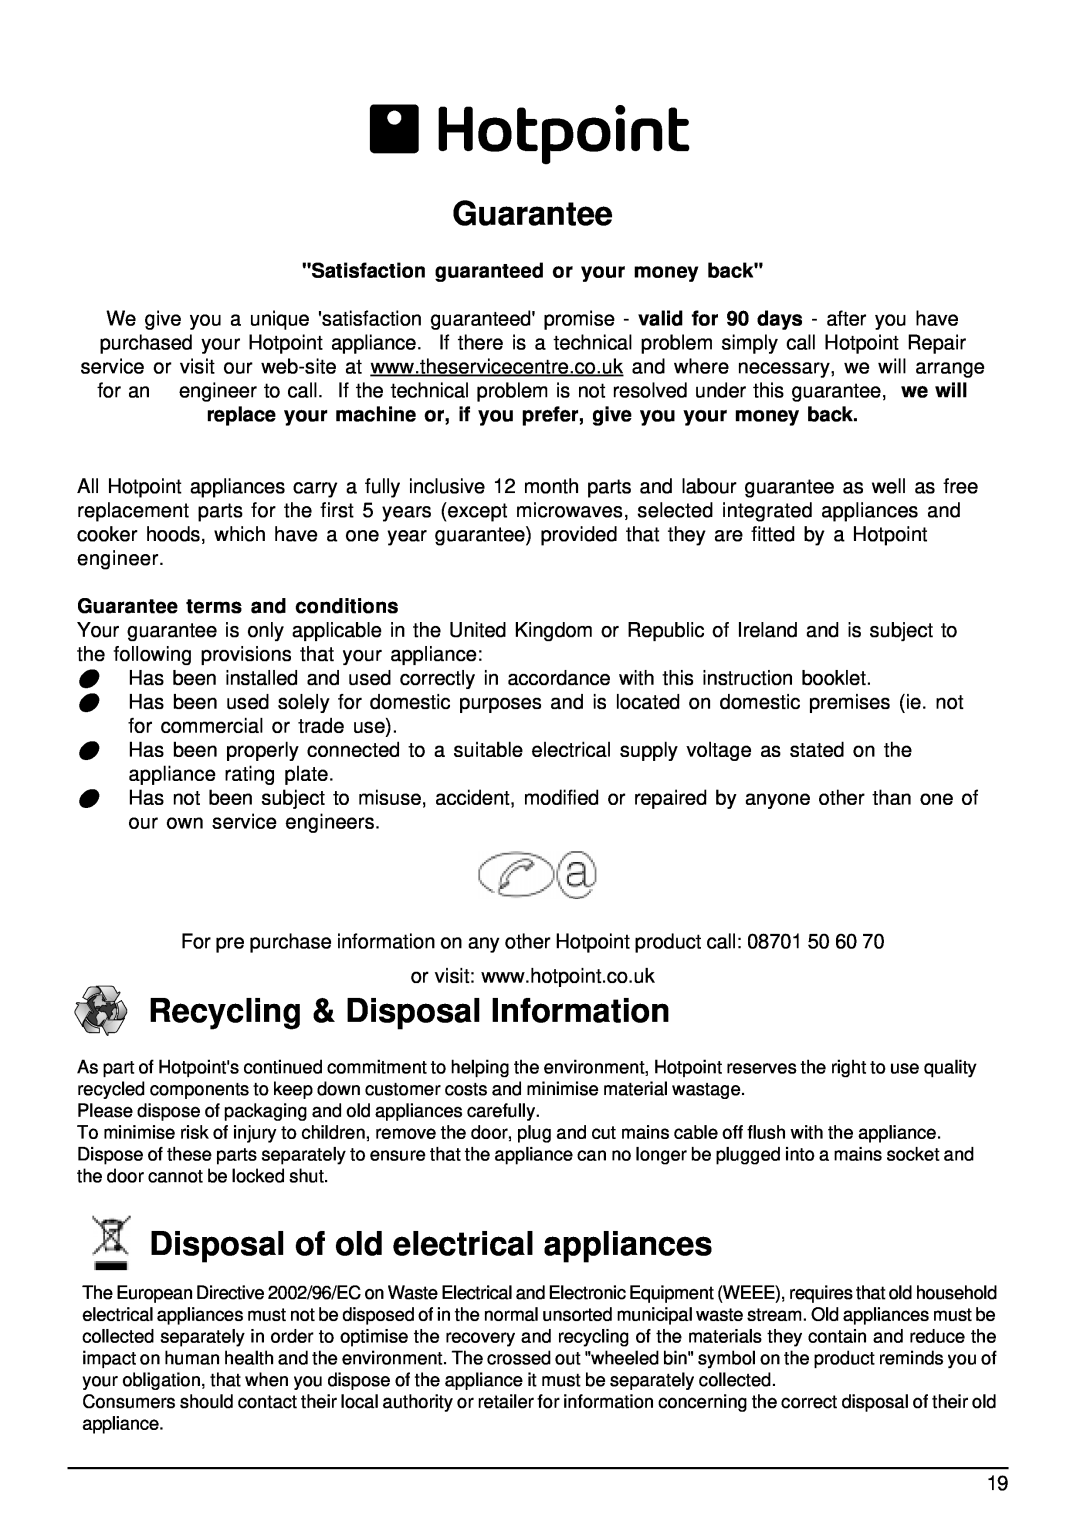 Hotpoint Aquarius FDW20 manual Guarantee, Recycling & Disposal Information, Disposal of old electrical appliances 